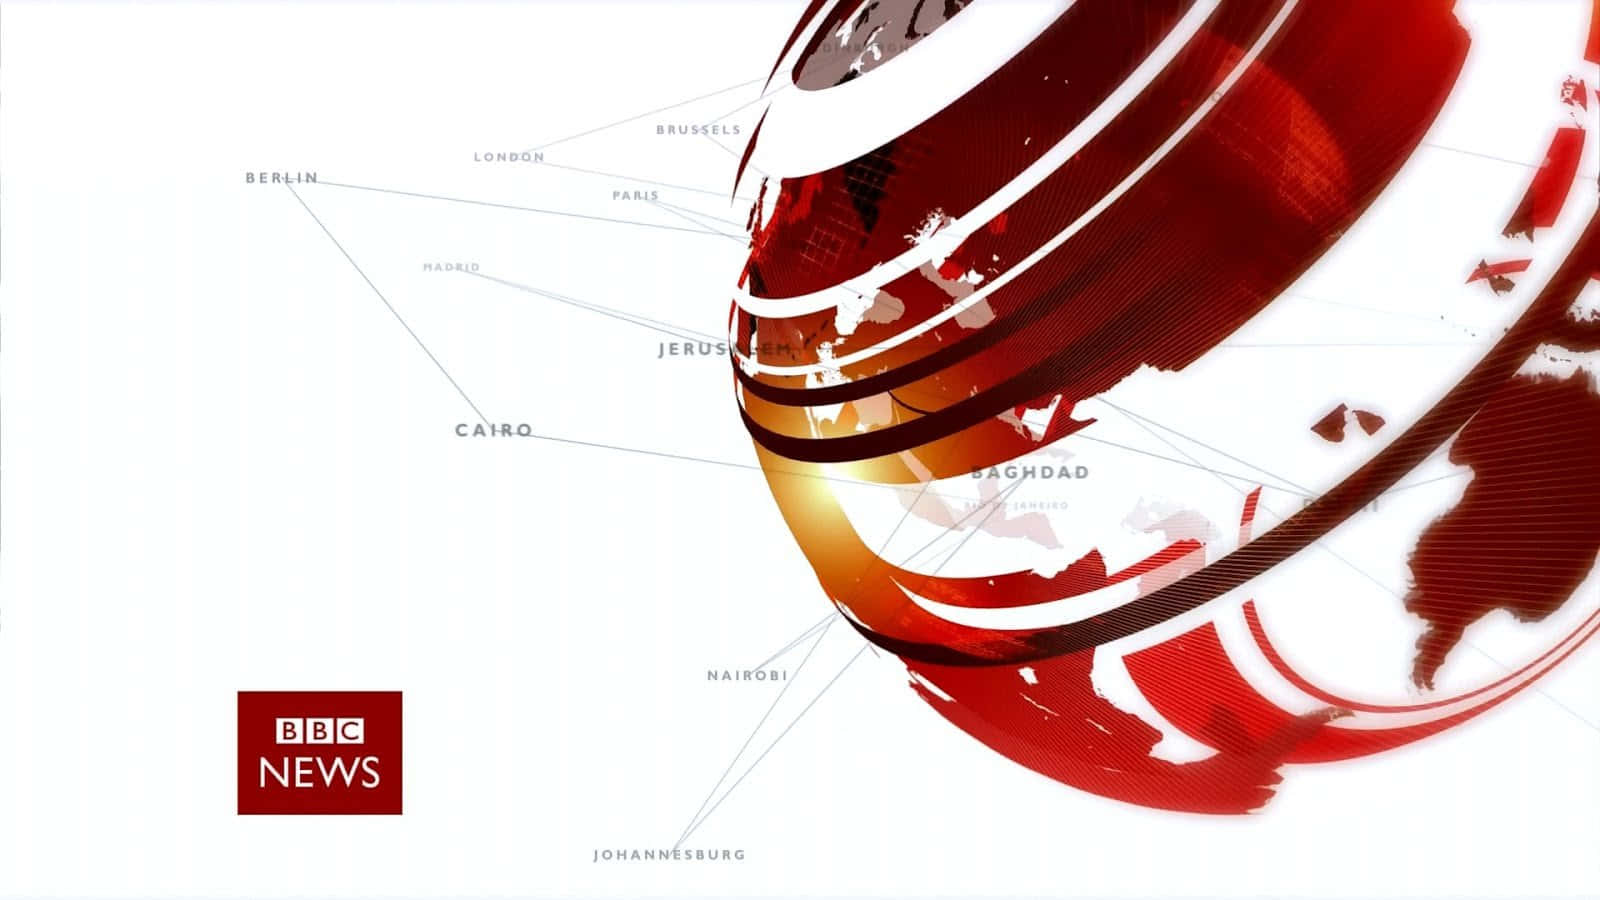 Be Informed and Up-to-Date with BBC News